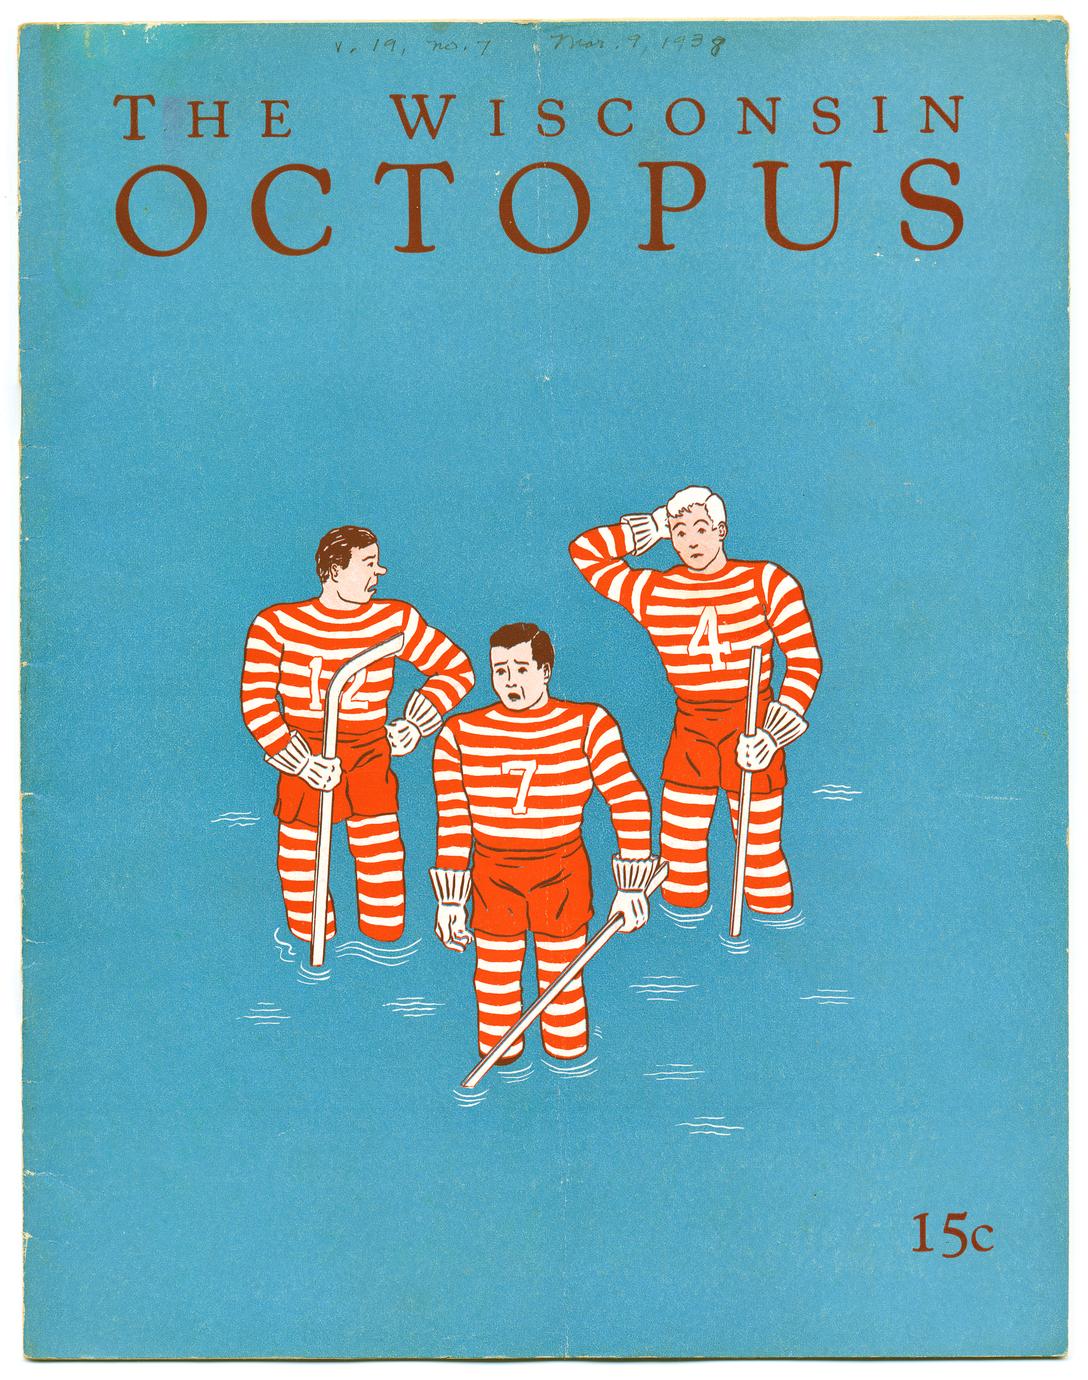 Wisconsin Octopus cover with hockey players